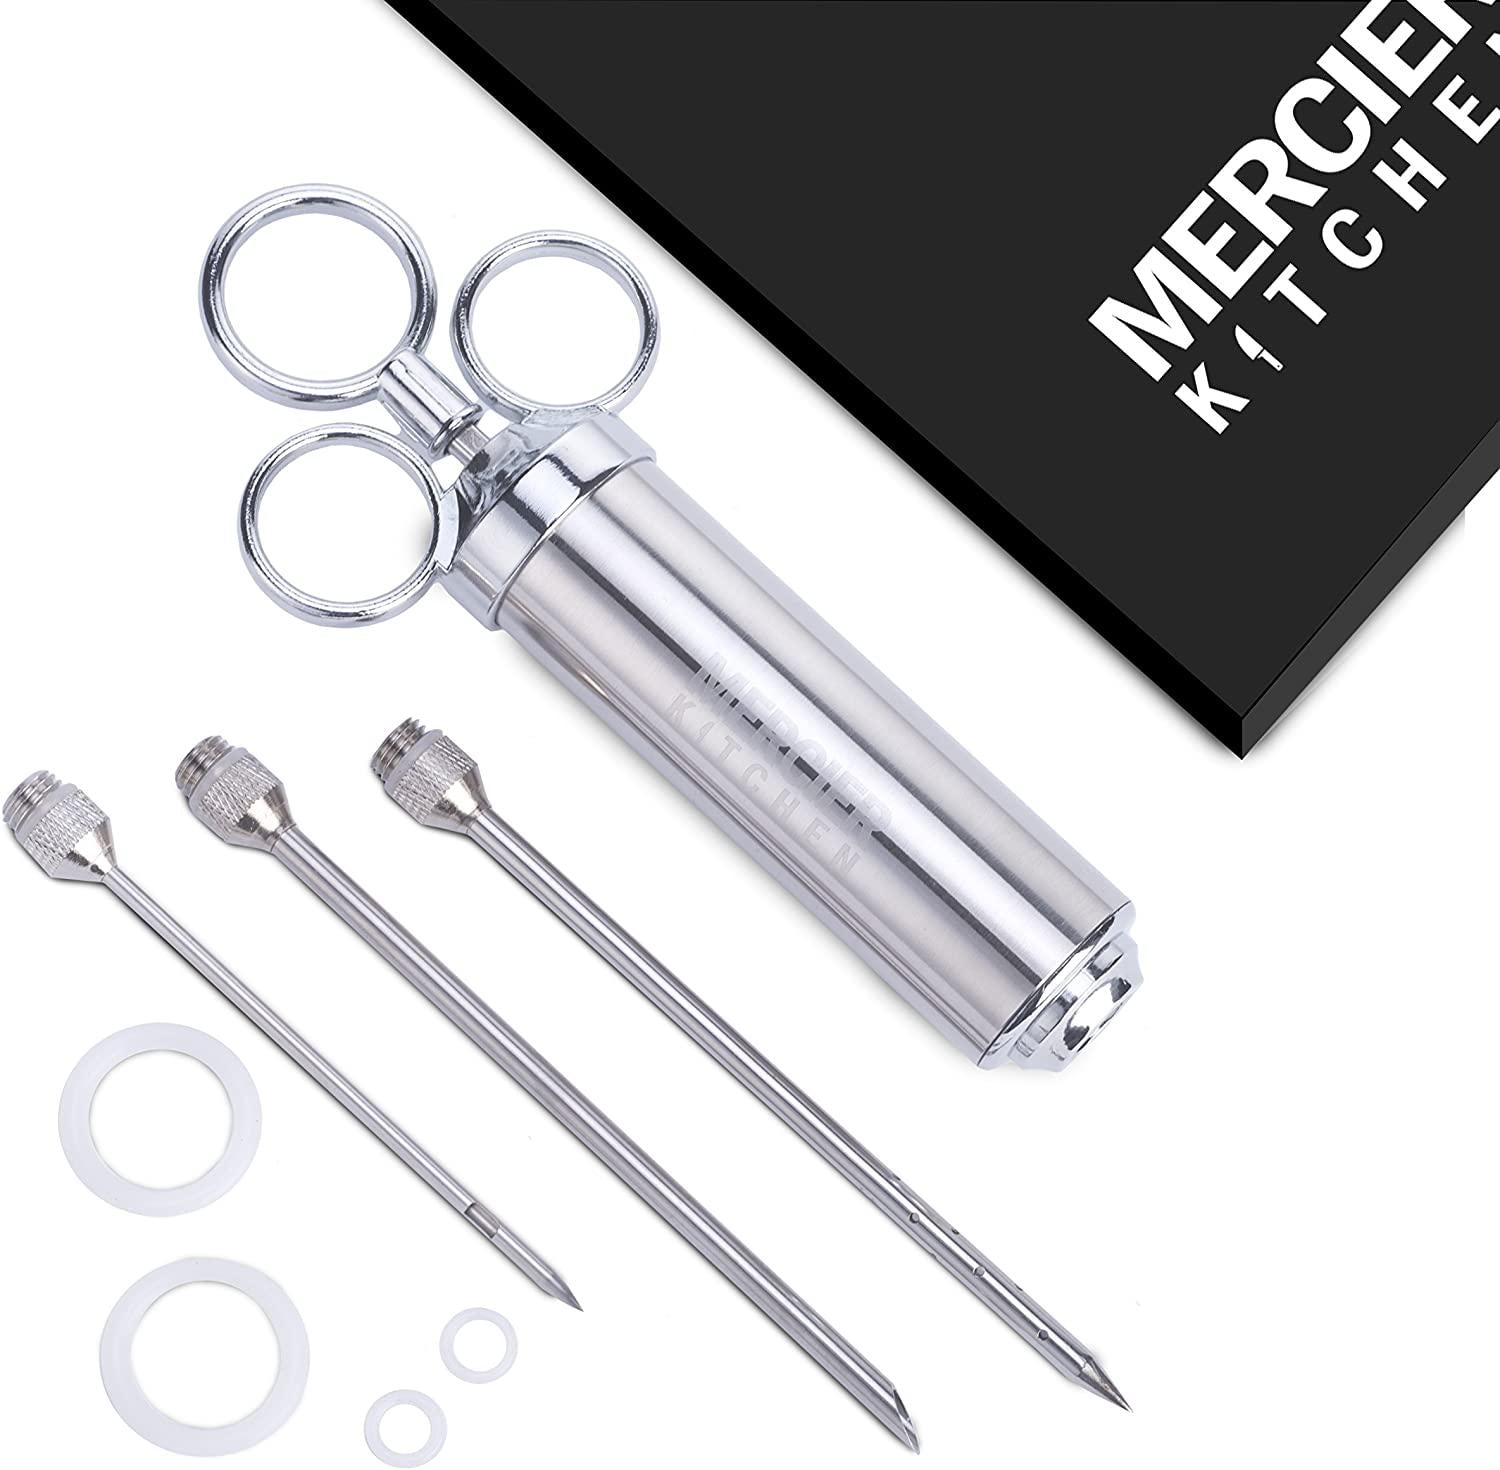 Mercier Kitchen, Mercier Kitchen Stainless Steel Heavy Duty Meat Marinade Injector with 2-Oz Large Capacity Barrel and 3 Marinade Needles